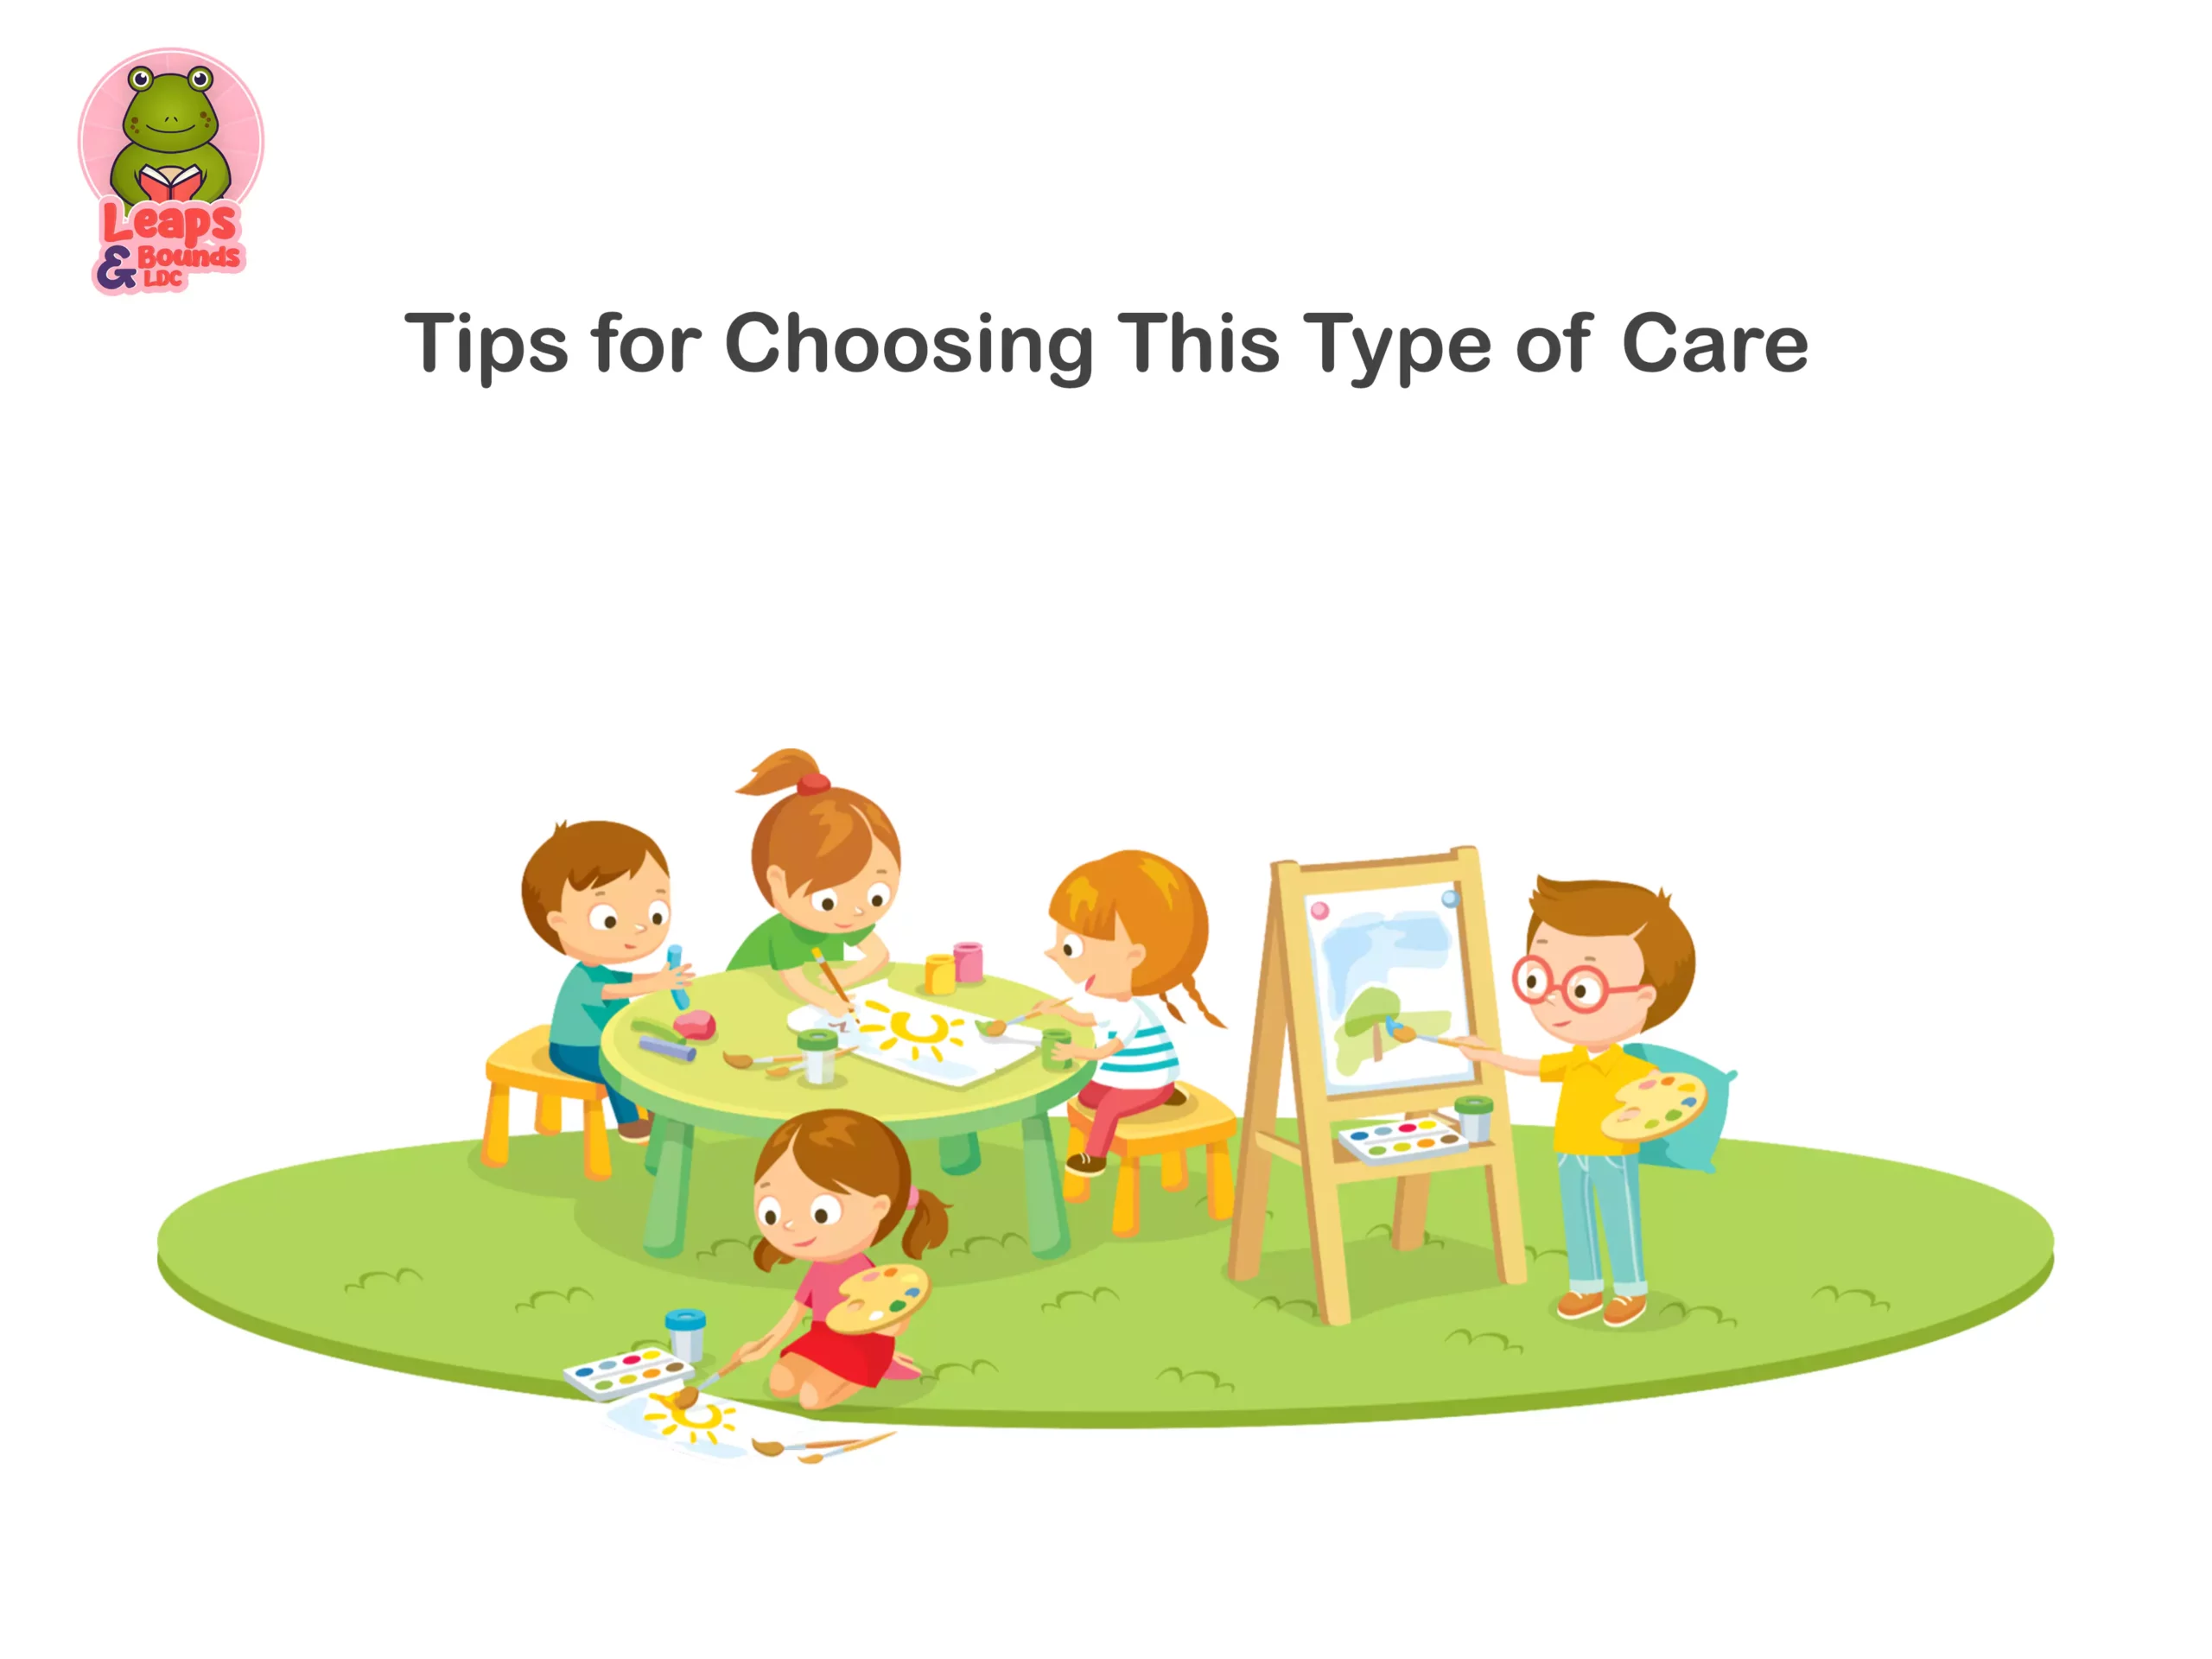 Tips for Choosing This Type of Care